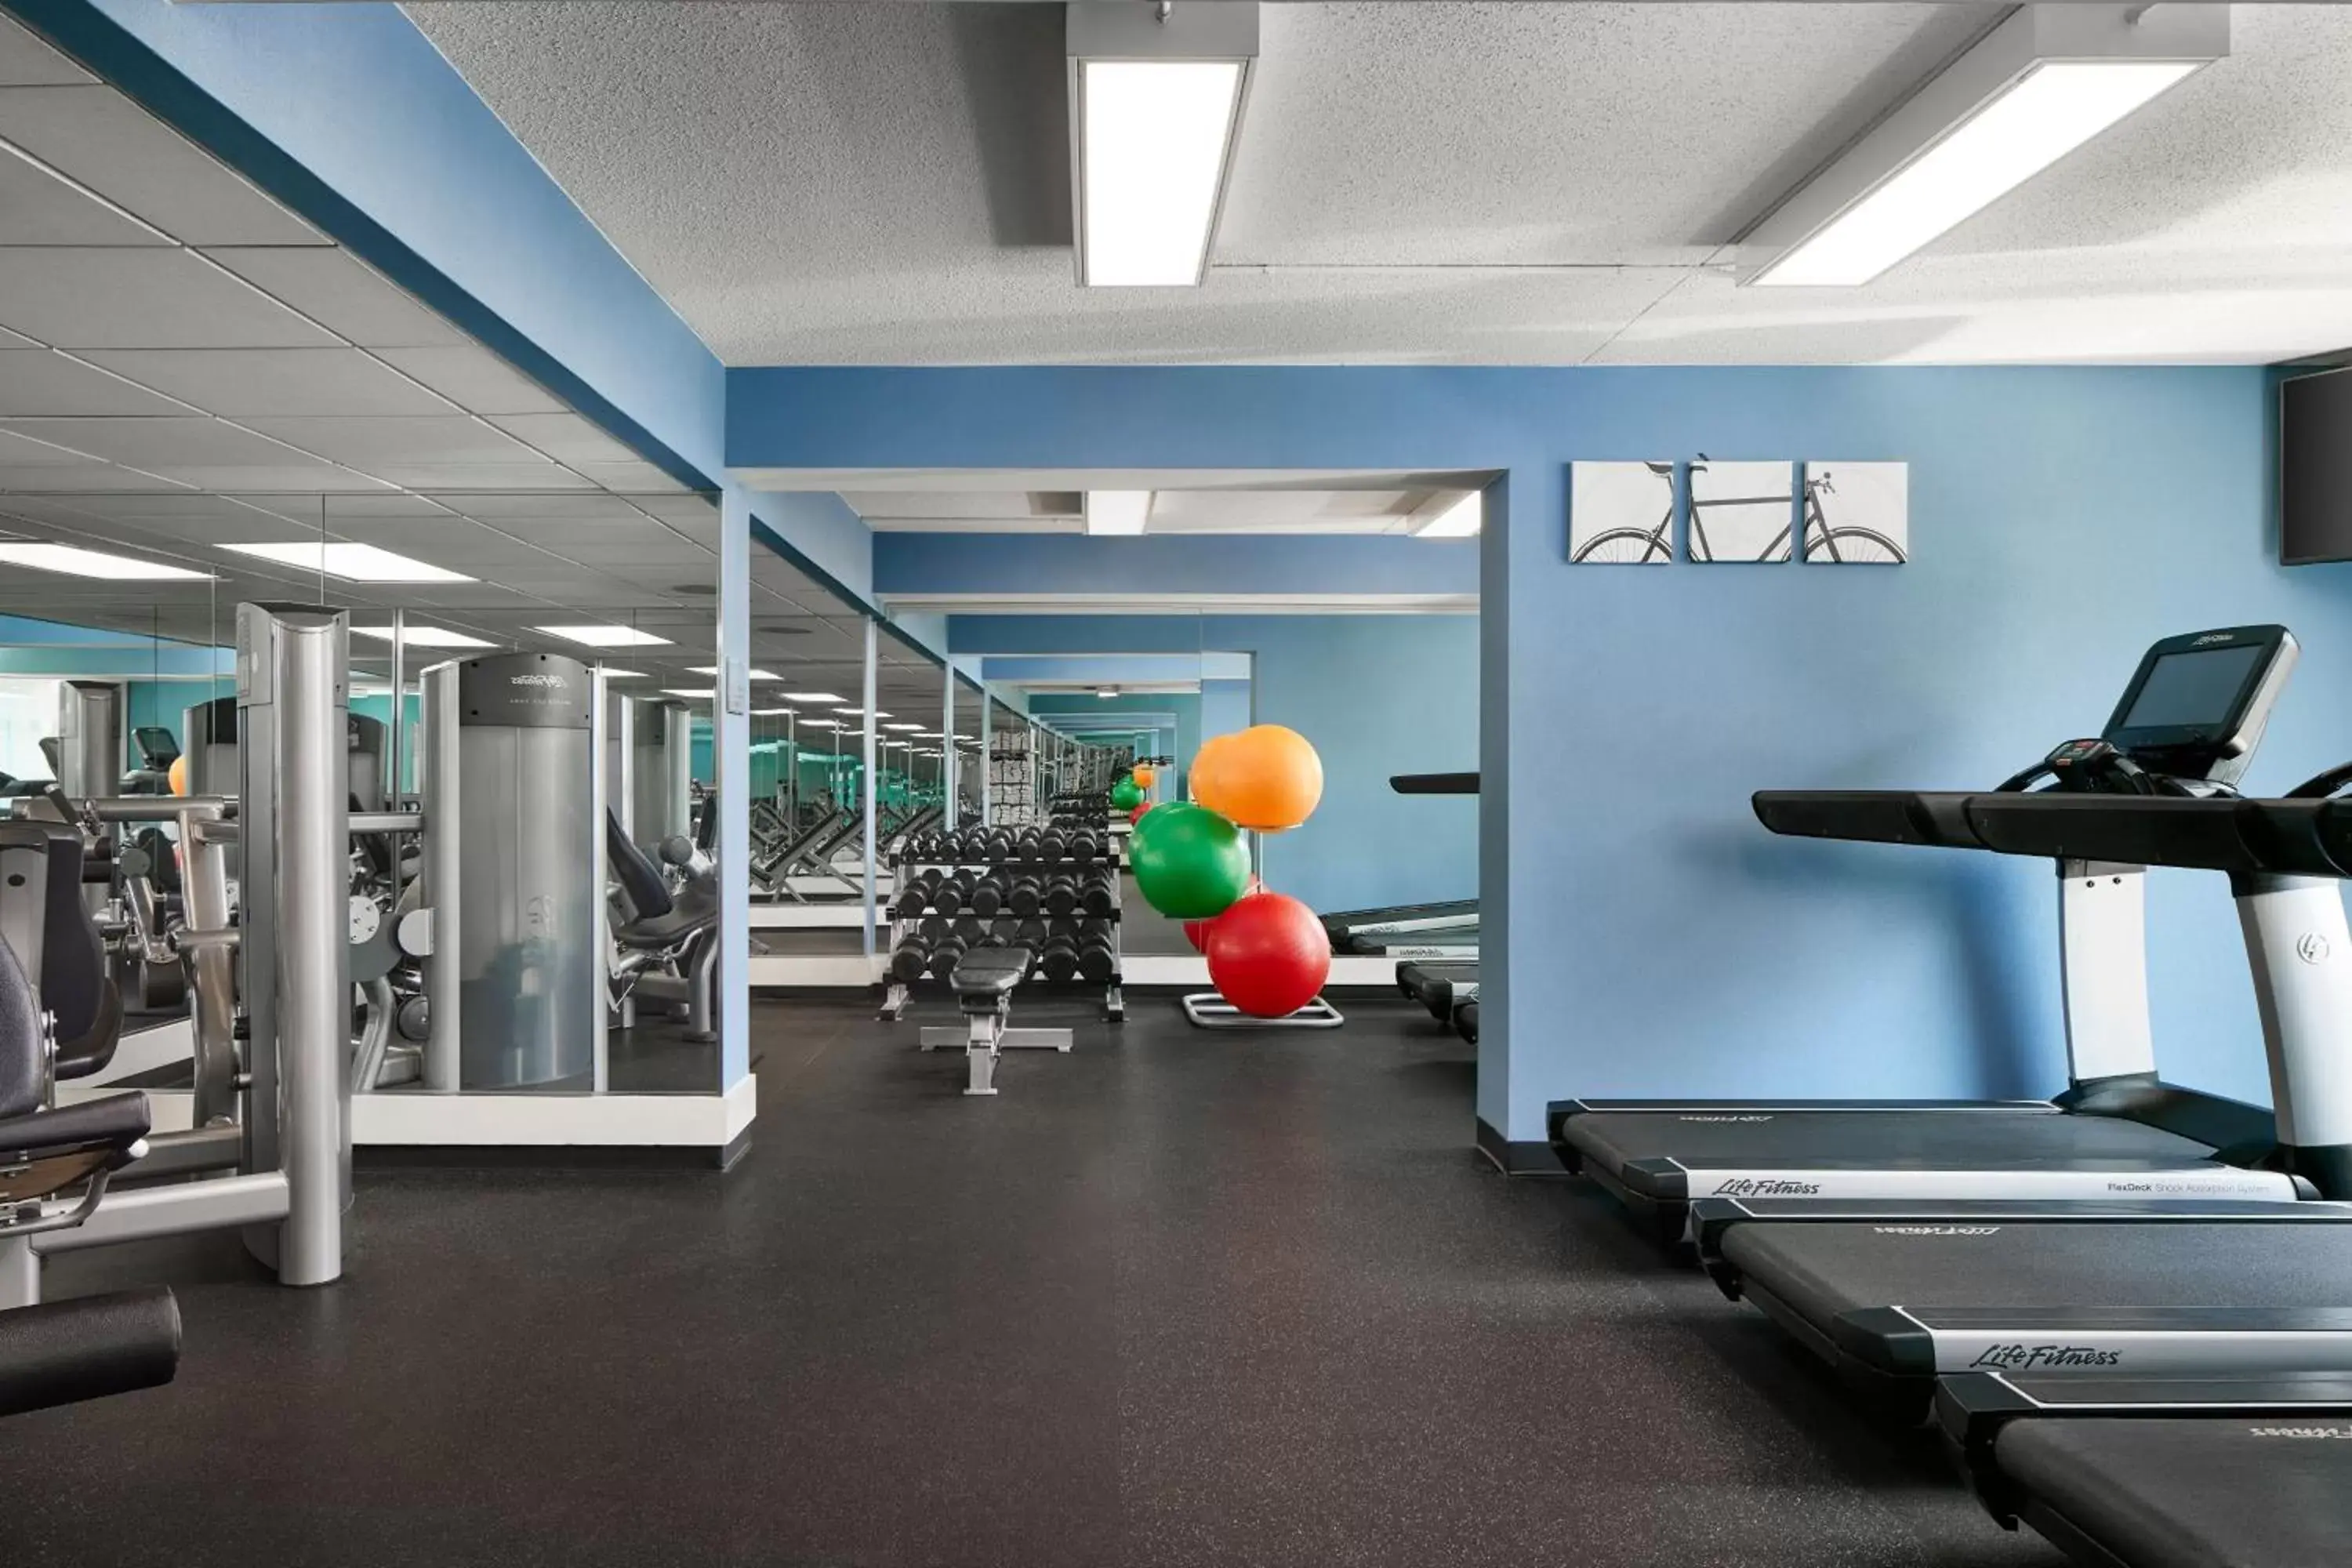 Fitness centre/facilities, Fitness Center/Facilities in Washington Dulles Airport Marriott